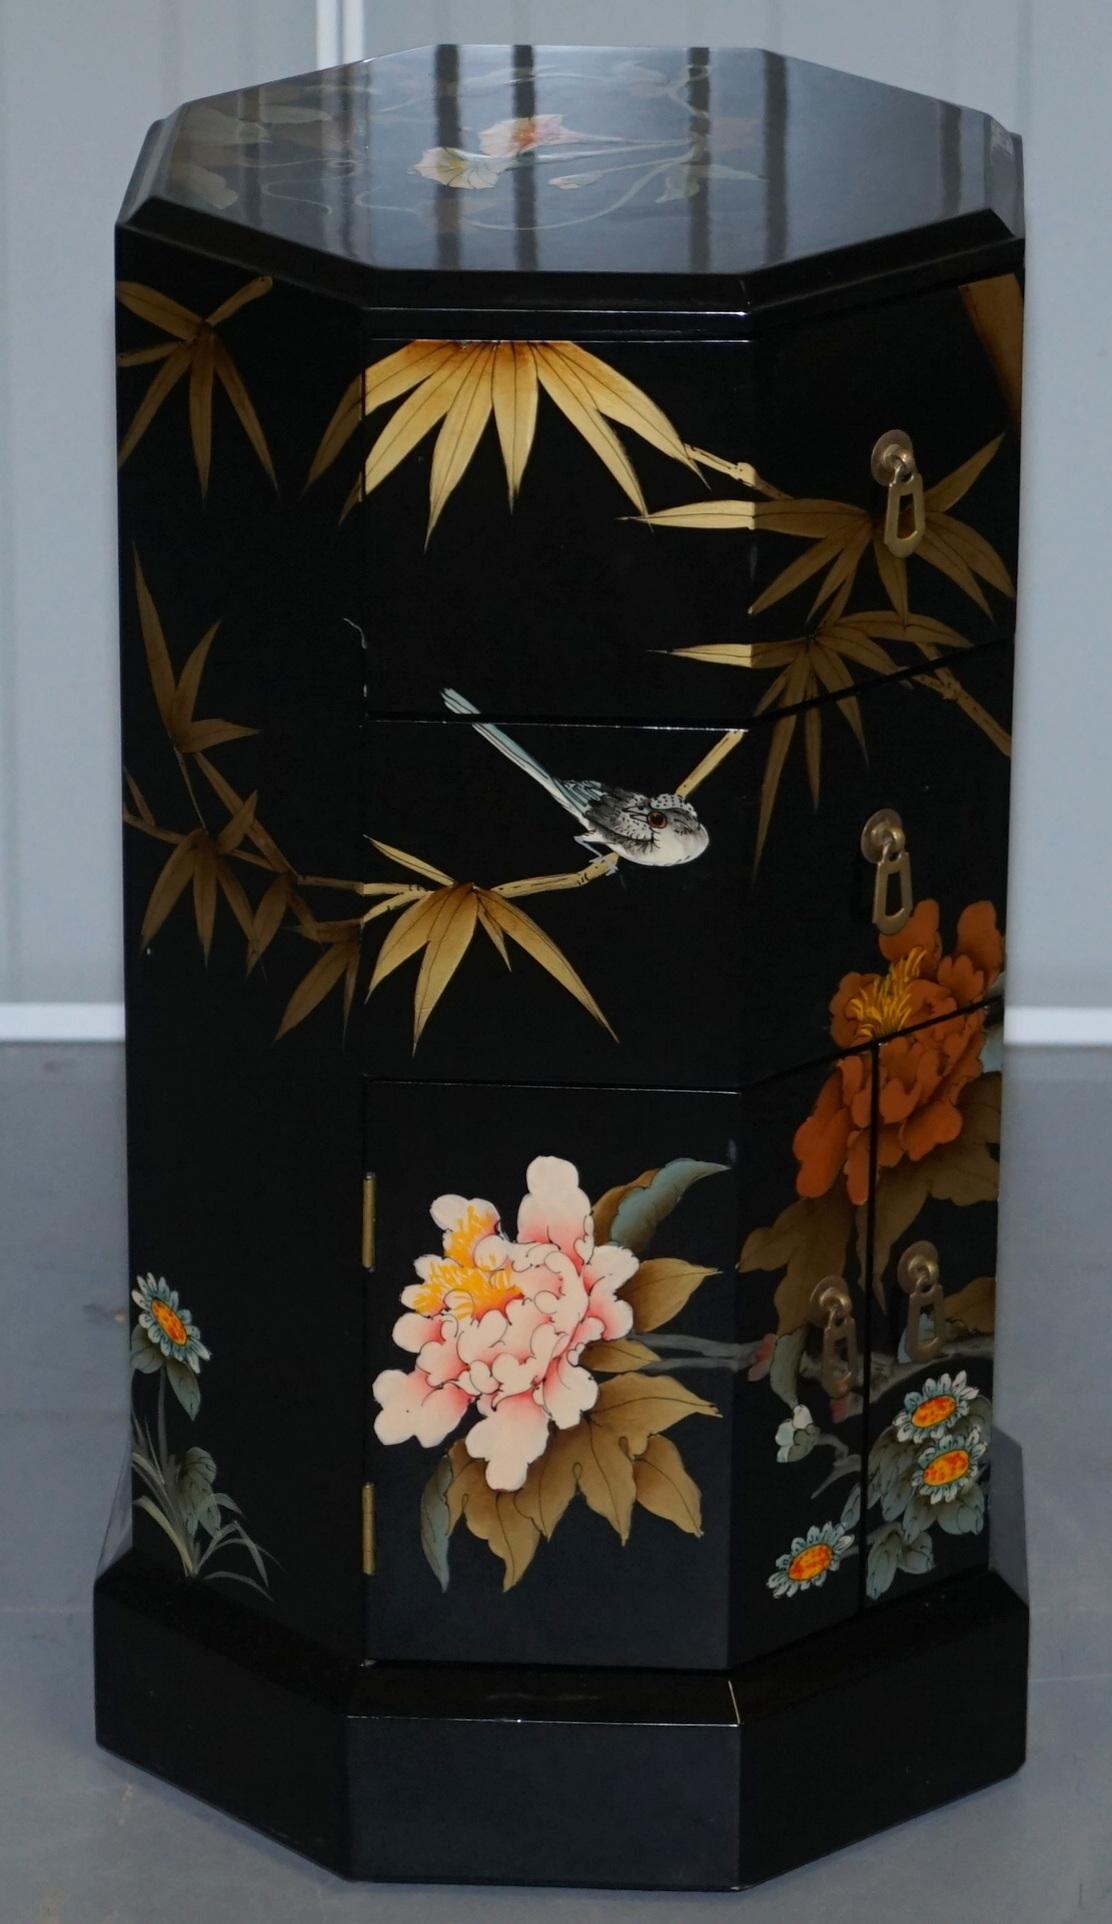 We are delighted to offer for sale this ornately decorated Asian lacquered and hand painted side table or work box

A good decorative piece, it can be used as a side table or work box, the drawers are lined with red baize

I can't see anything